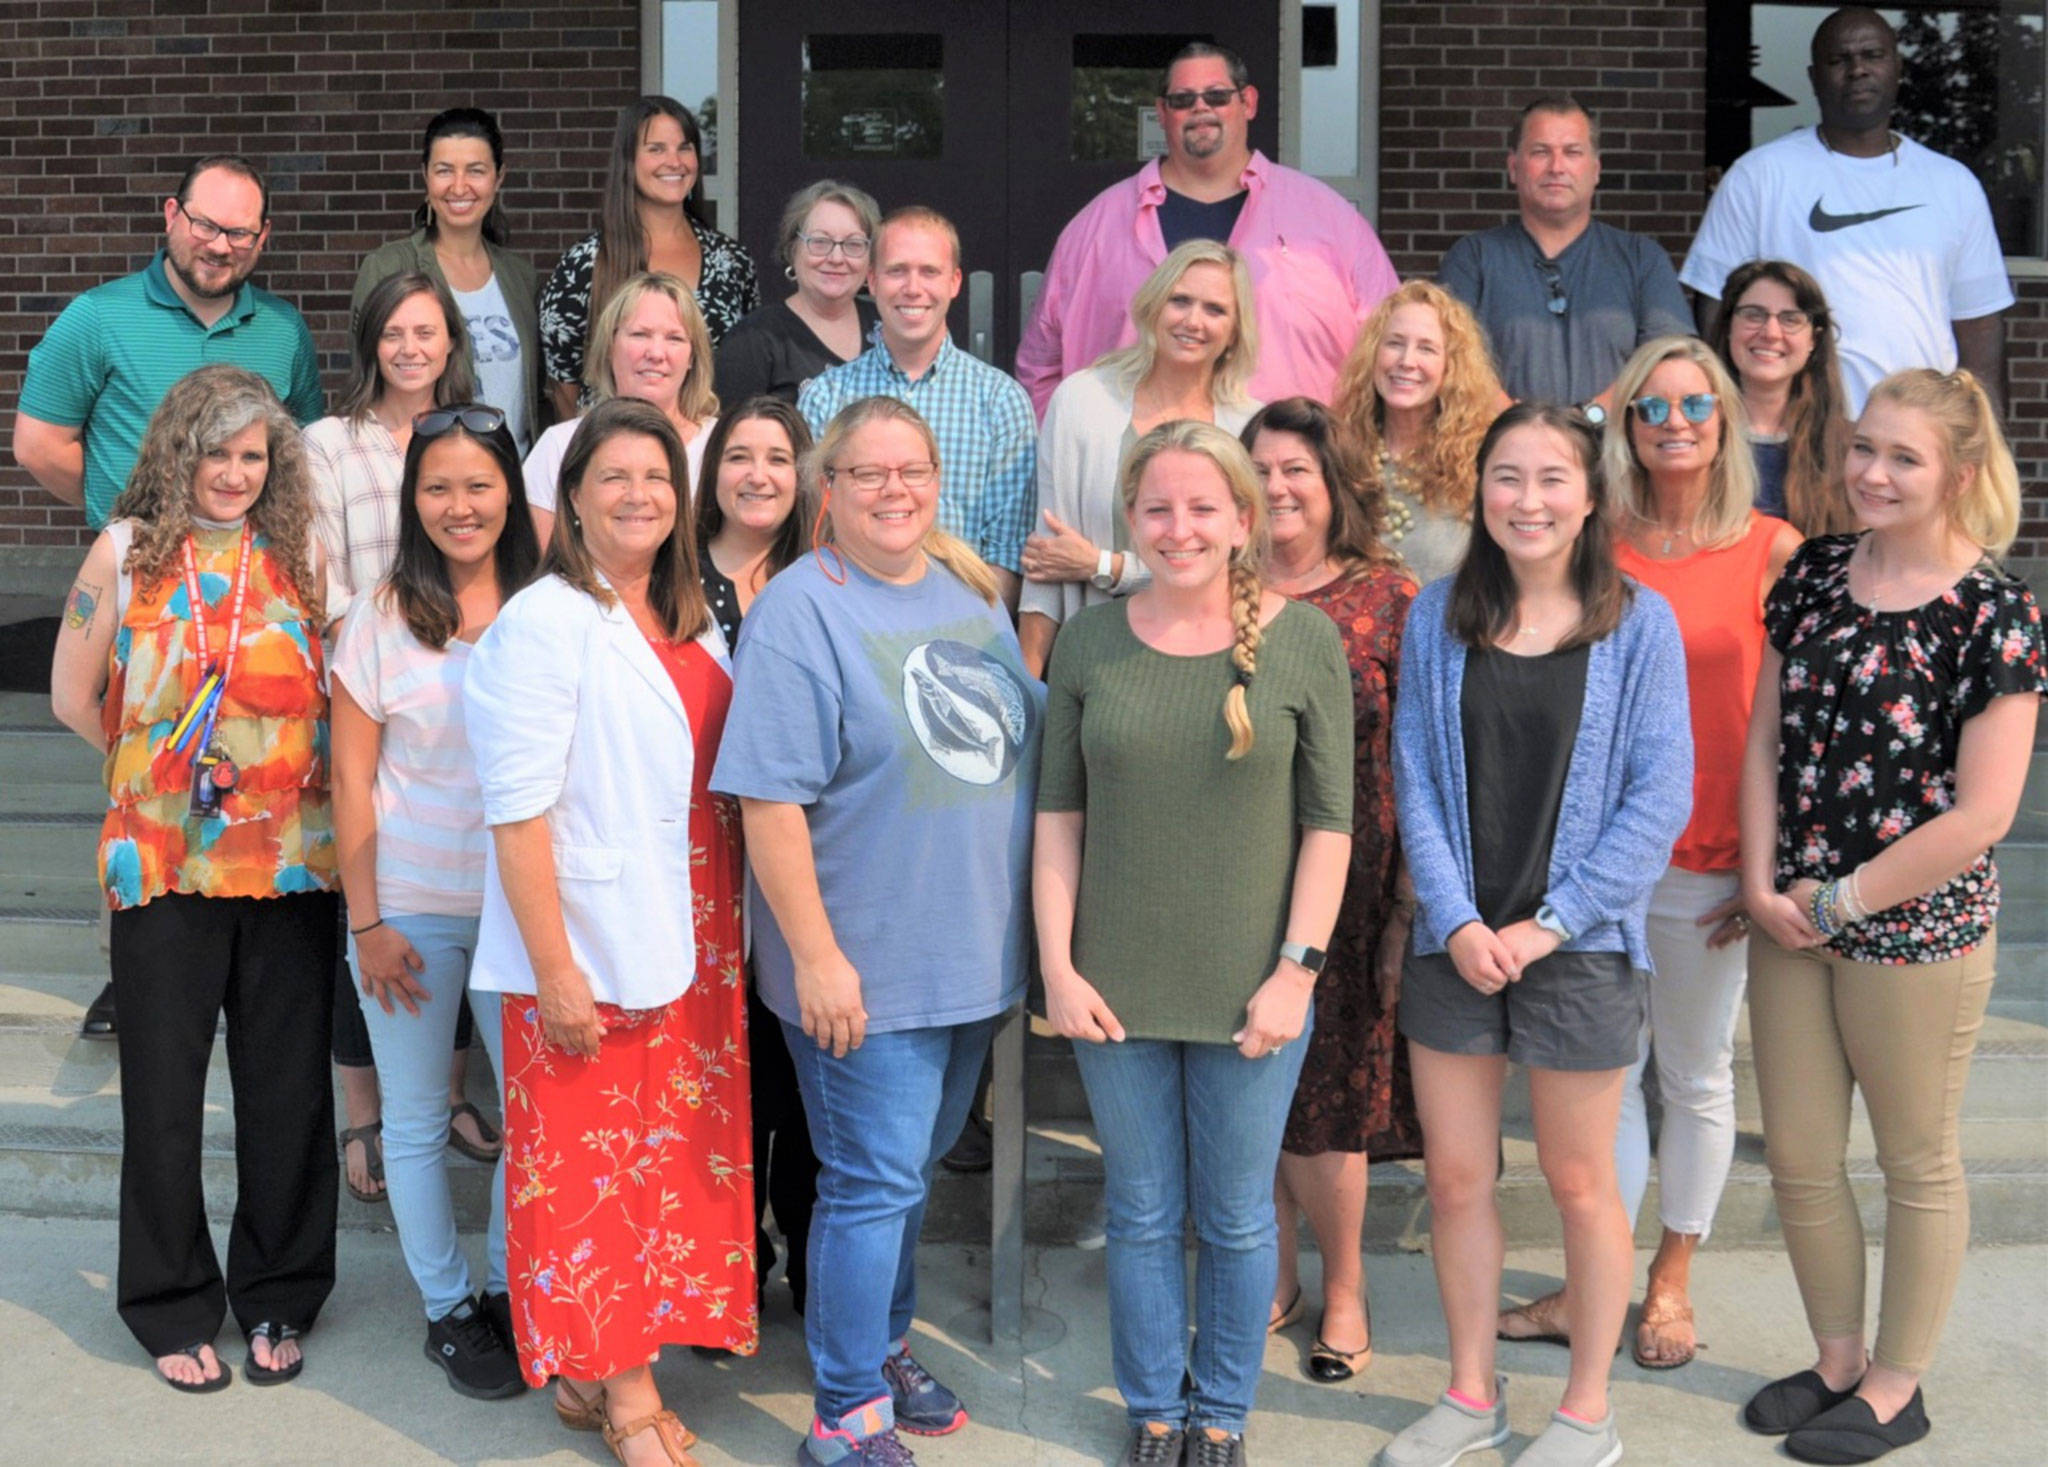 Led by Sequim School District facilitator Pam Landoni (from row, far left, the Sequim School District welcomes new staffers for the 2018-2019 school year. They include (back row, from left) Casey Lanning, Greywolf Elementary School; Alla Bess, Sequim School District; Renee Colwill, Helen Haller Elementary School; Kathryn Baulch, Helen Haller Elementary; George Rodes, Sequim Middle School; Bill McFarlen, Sequim High School; and Joclin Julmist, Helen Haller Elementary; (third row, from left) Amanda Murphy, Greywolf Elementary; Nachelle Jannetti, Helen Haller Elementary; Joey Marcey, Helen Haller Elementary; Kristi Schmeck, Sequim Middle School; Marie Claire Bernards, Helen Haller Elementary; and Ashley Kramer, Greywolf Elementary; (second row, from left) Jennifer Thatcher, Helen Haller Elementary; Melissa Sagara, Helen Haller Elementary; Doreen Minard, Helen Haller Elementary; Linda Jacobson, Greywolf Elementary; and Brooke Hoefler, Helen Haller Elementary; with (first row, from left) Landoni; Lorrie Corder, Helen Haller Elementary; Johanna Mitchell, Sequim Middle School; Jasmine McMullin, Helen Haller Elementary; and Lora Rudzinski, Greywolf Elementary School. Not pictured are Leanne Felts and Norma Graham. Photo by Hanna Smith/Sequim School District